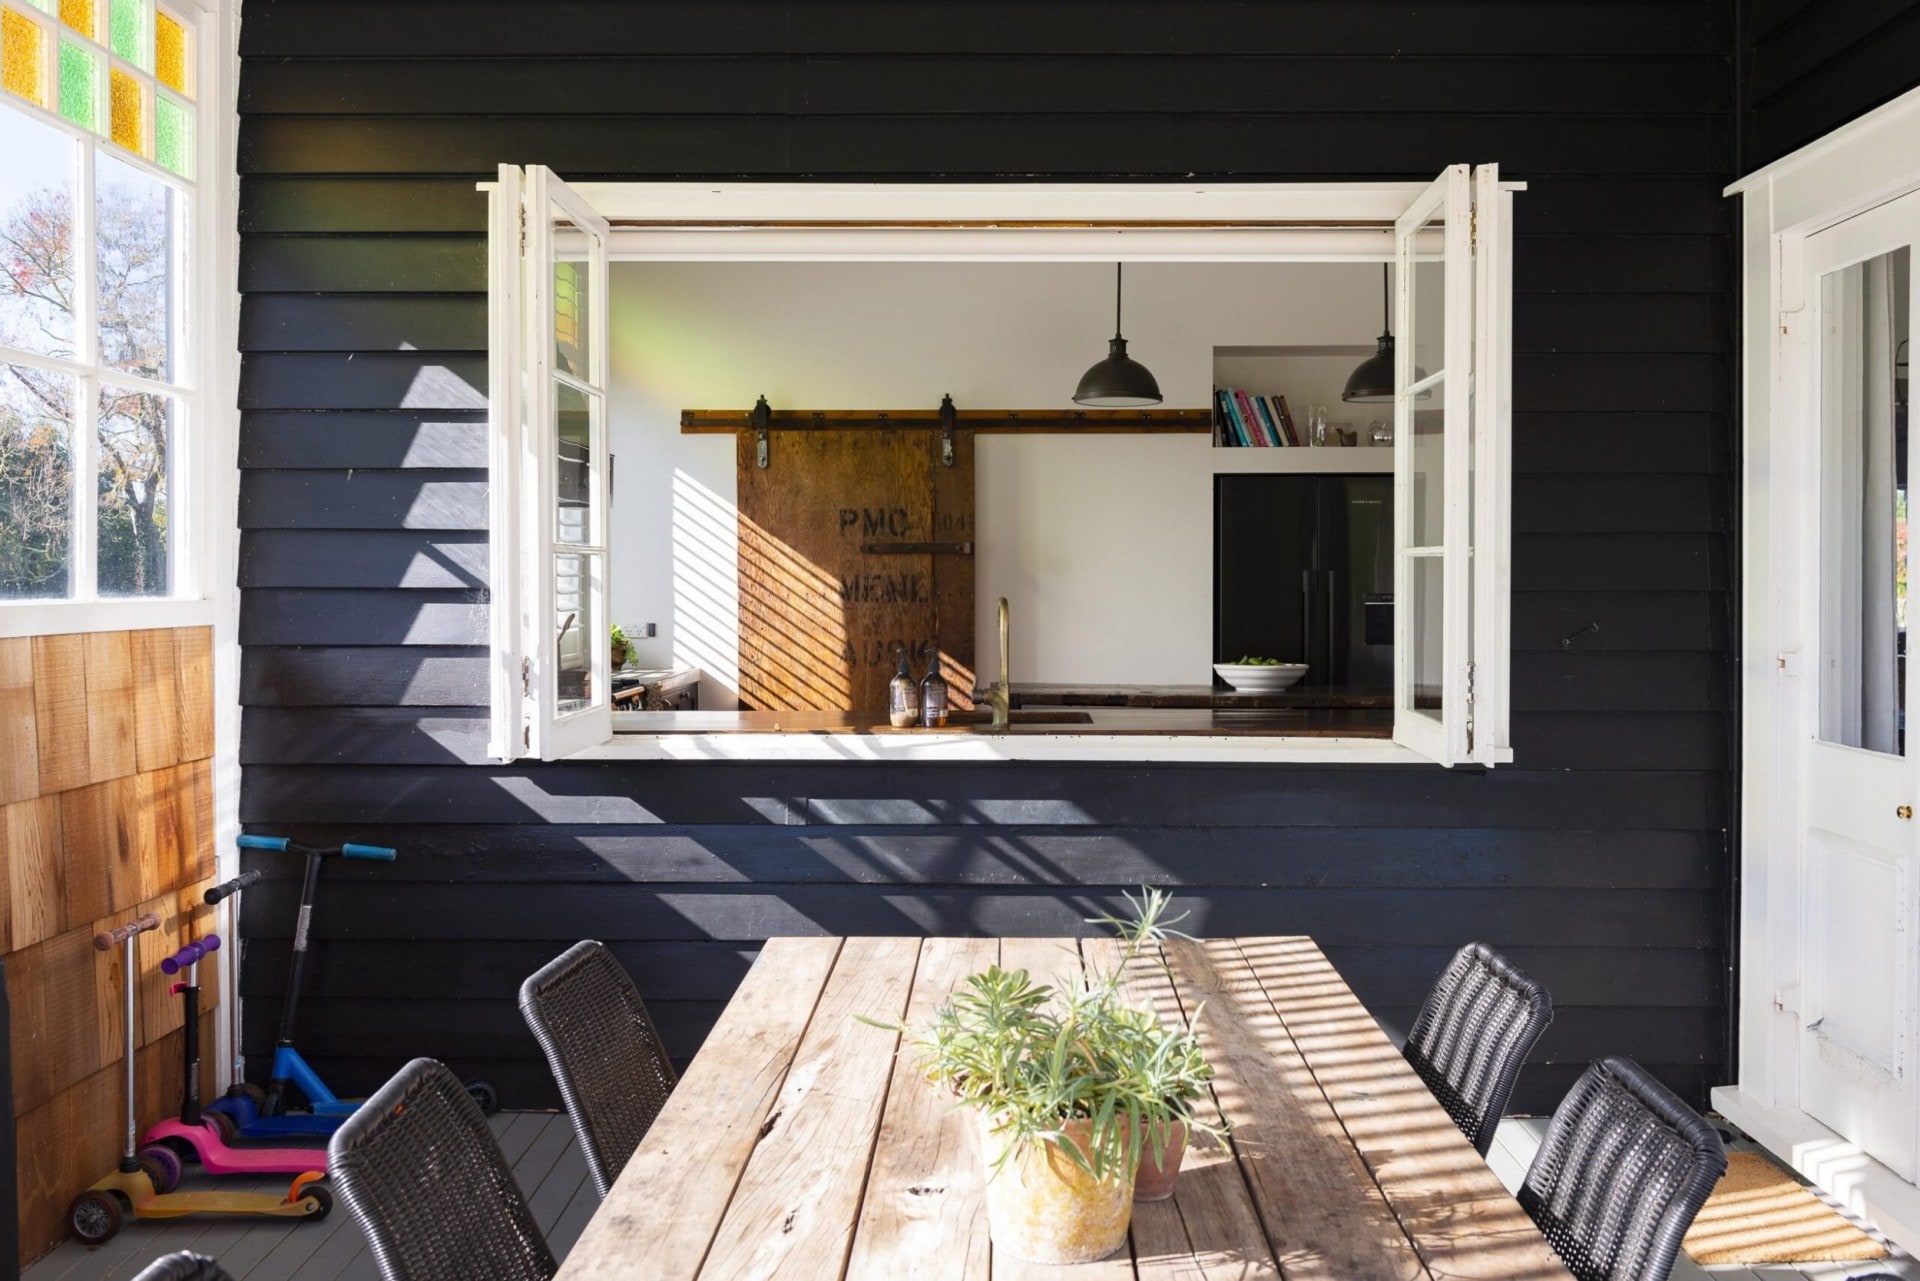 An outdoor wood table with an open window facing the kitchen 